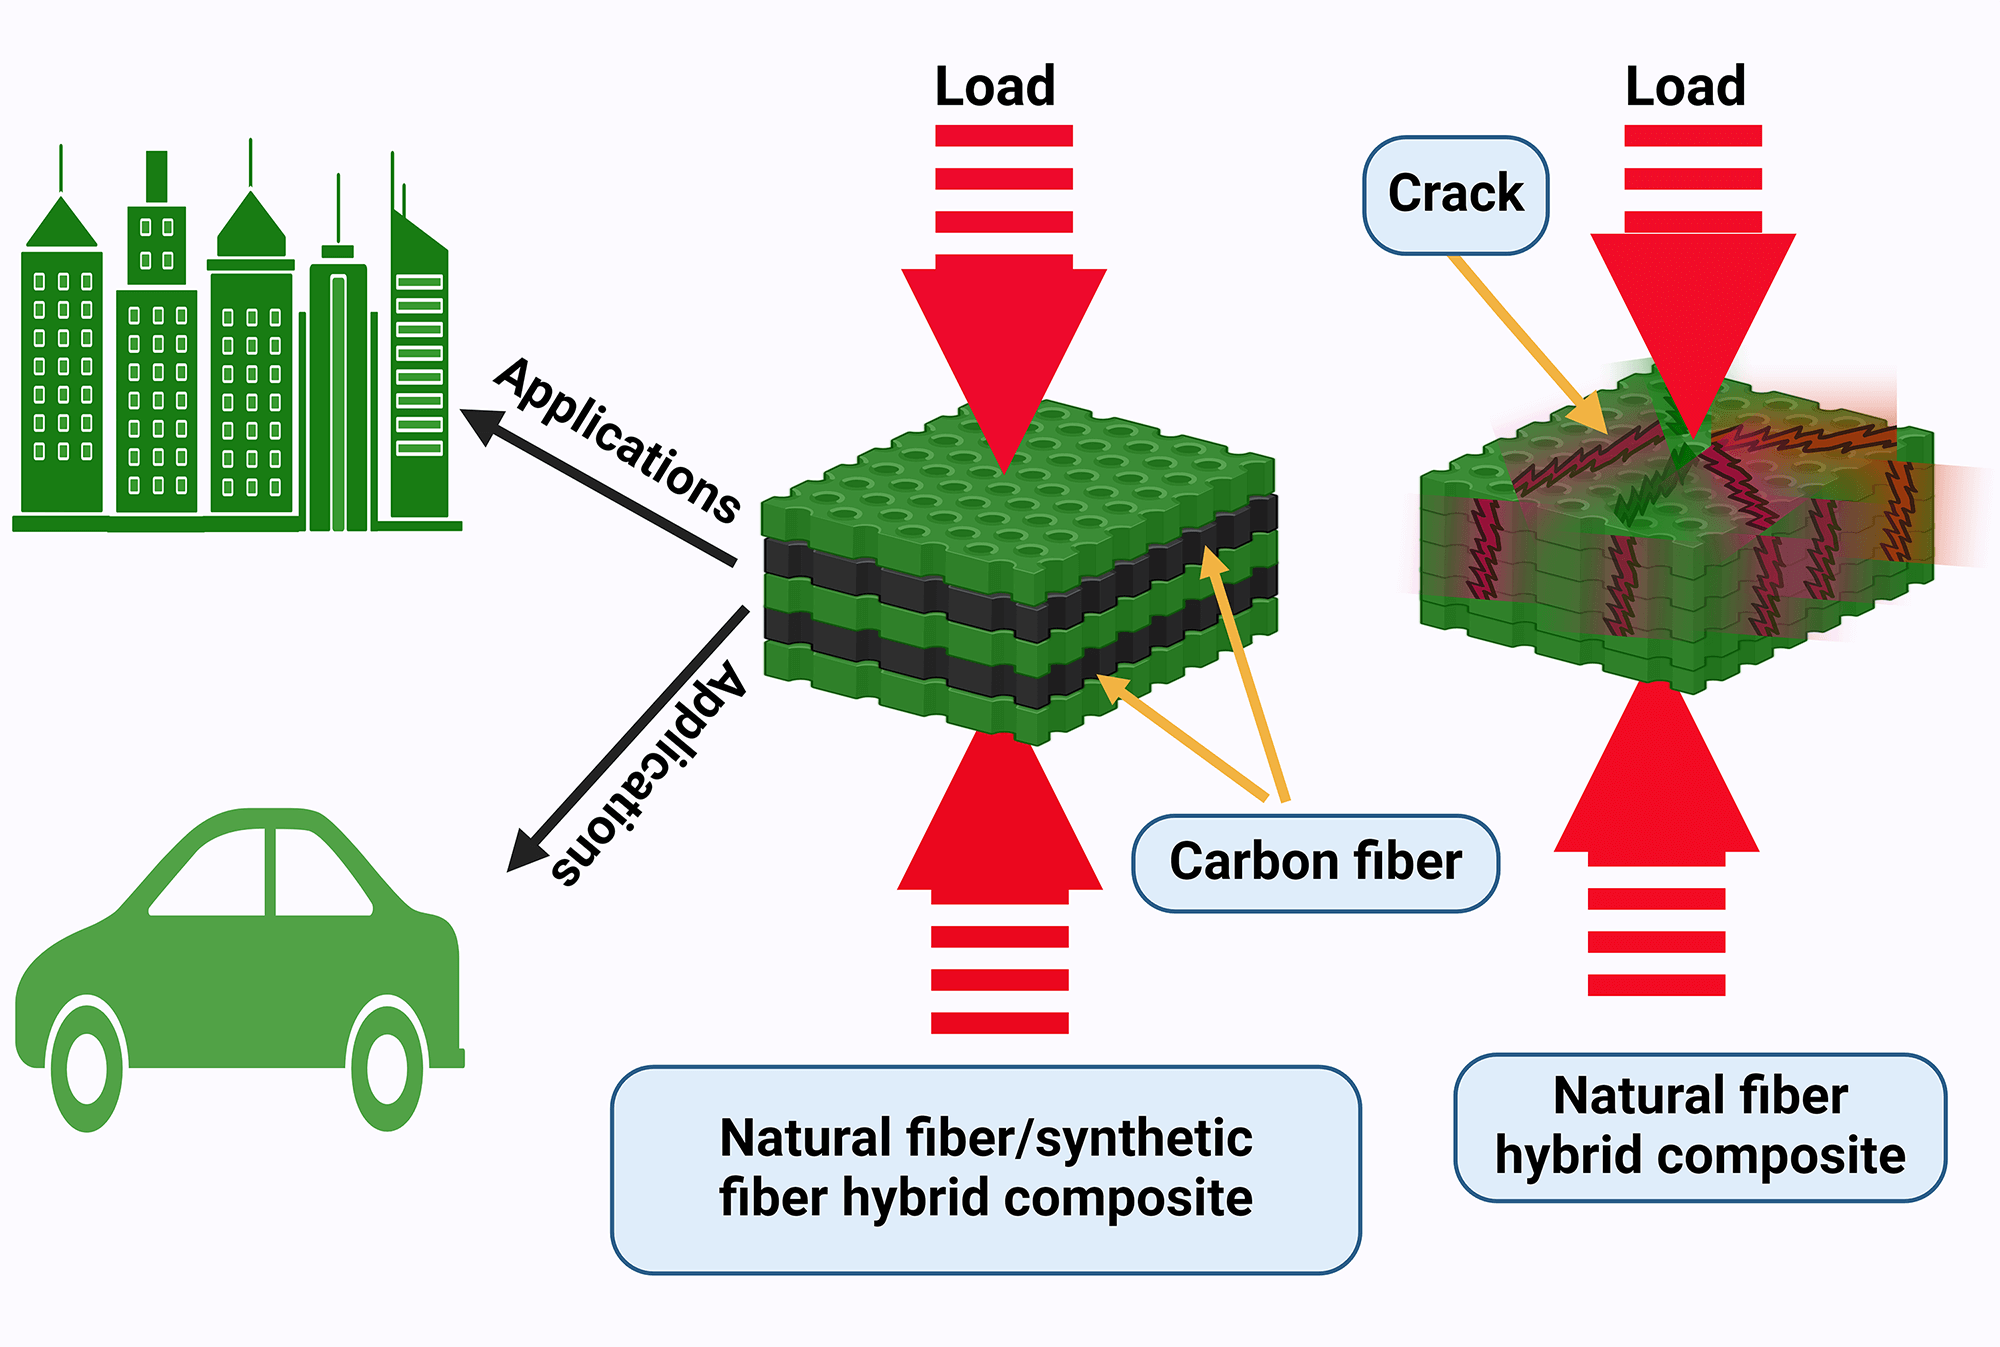 A Review on the Advancement of Renewable Natural Fiber Hybrid Composites: Prospects, Challenges, and Industrial Applications